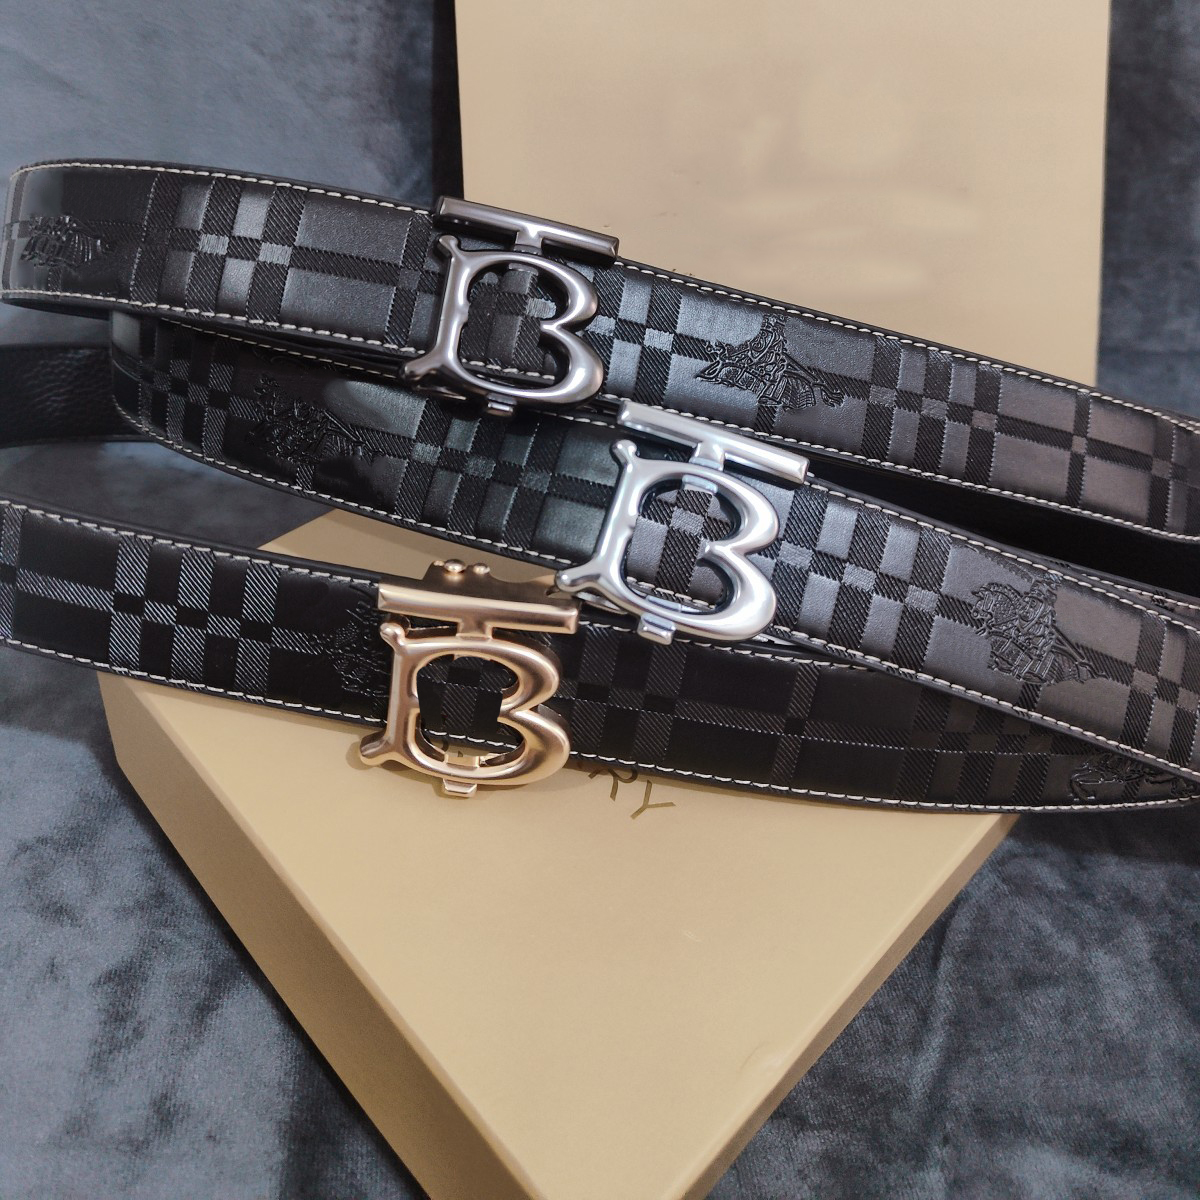 Designer belt luxury men classic Automatic buckle belts gold and silver black buckle head striped casual width 3 8cm size 105-125c257A